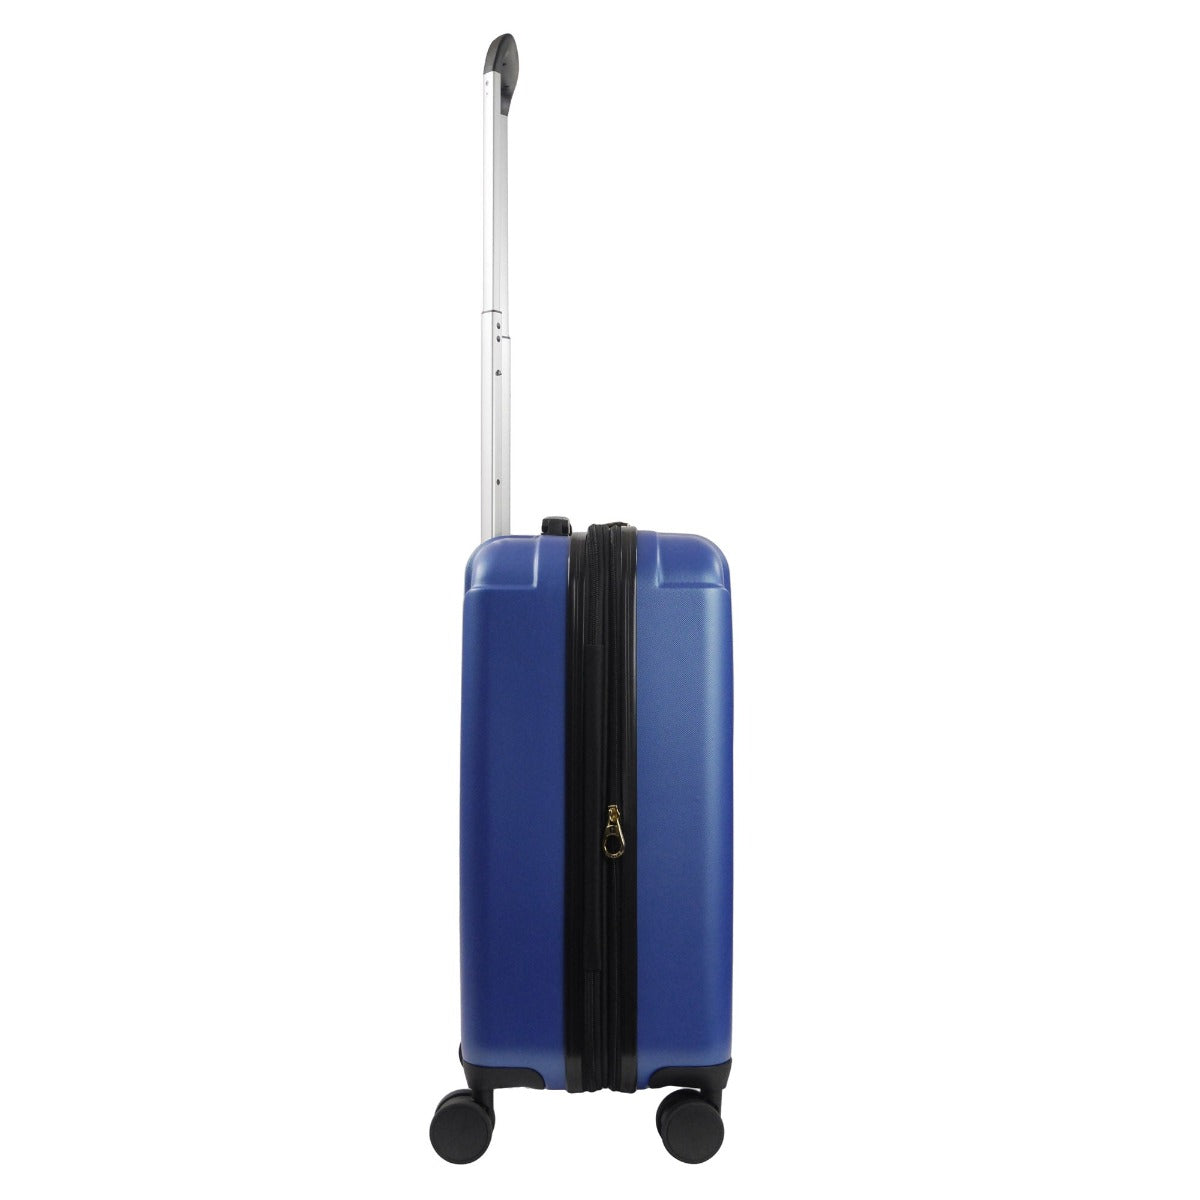 Load Rider 21" Spinner Suitcase Rolling Luggage Cobalt Blue